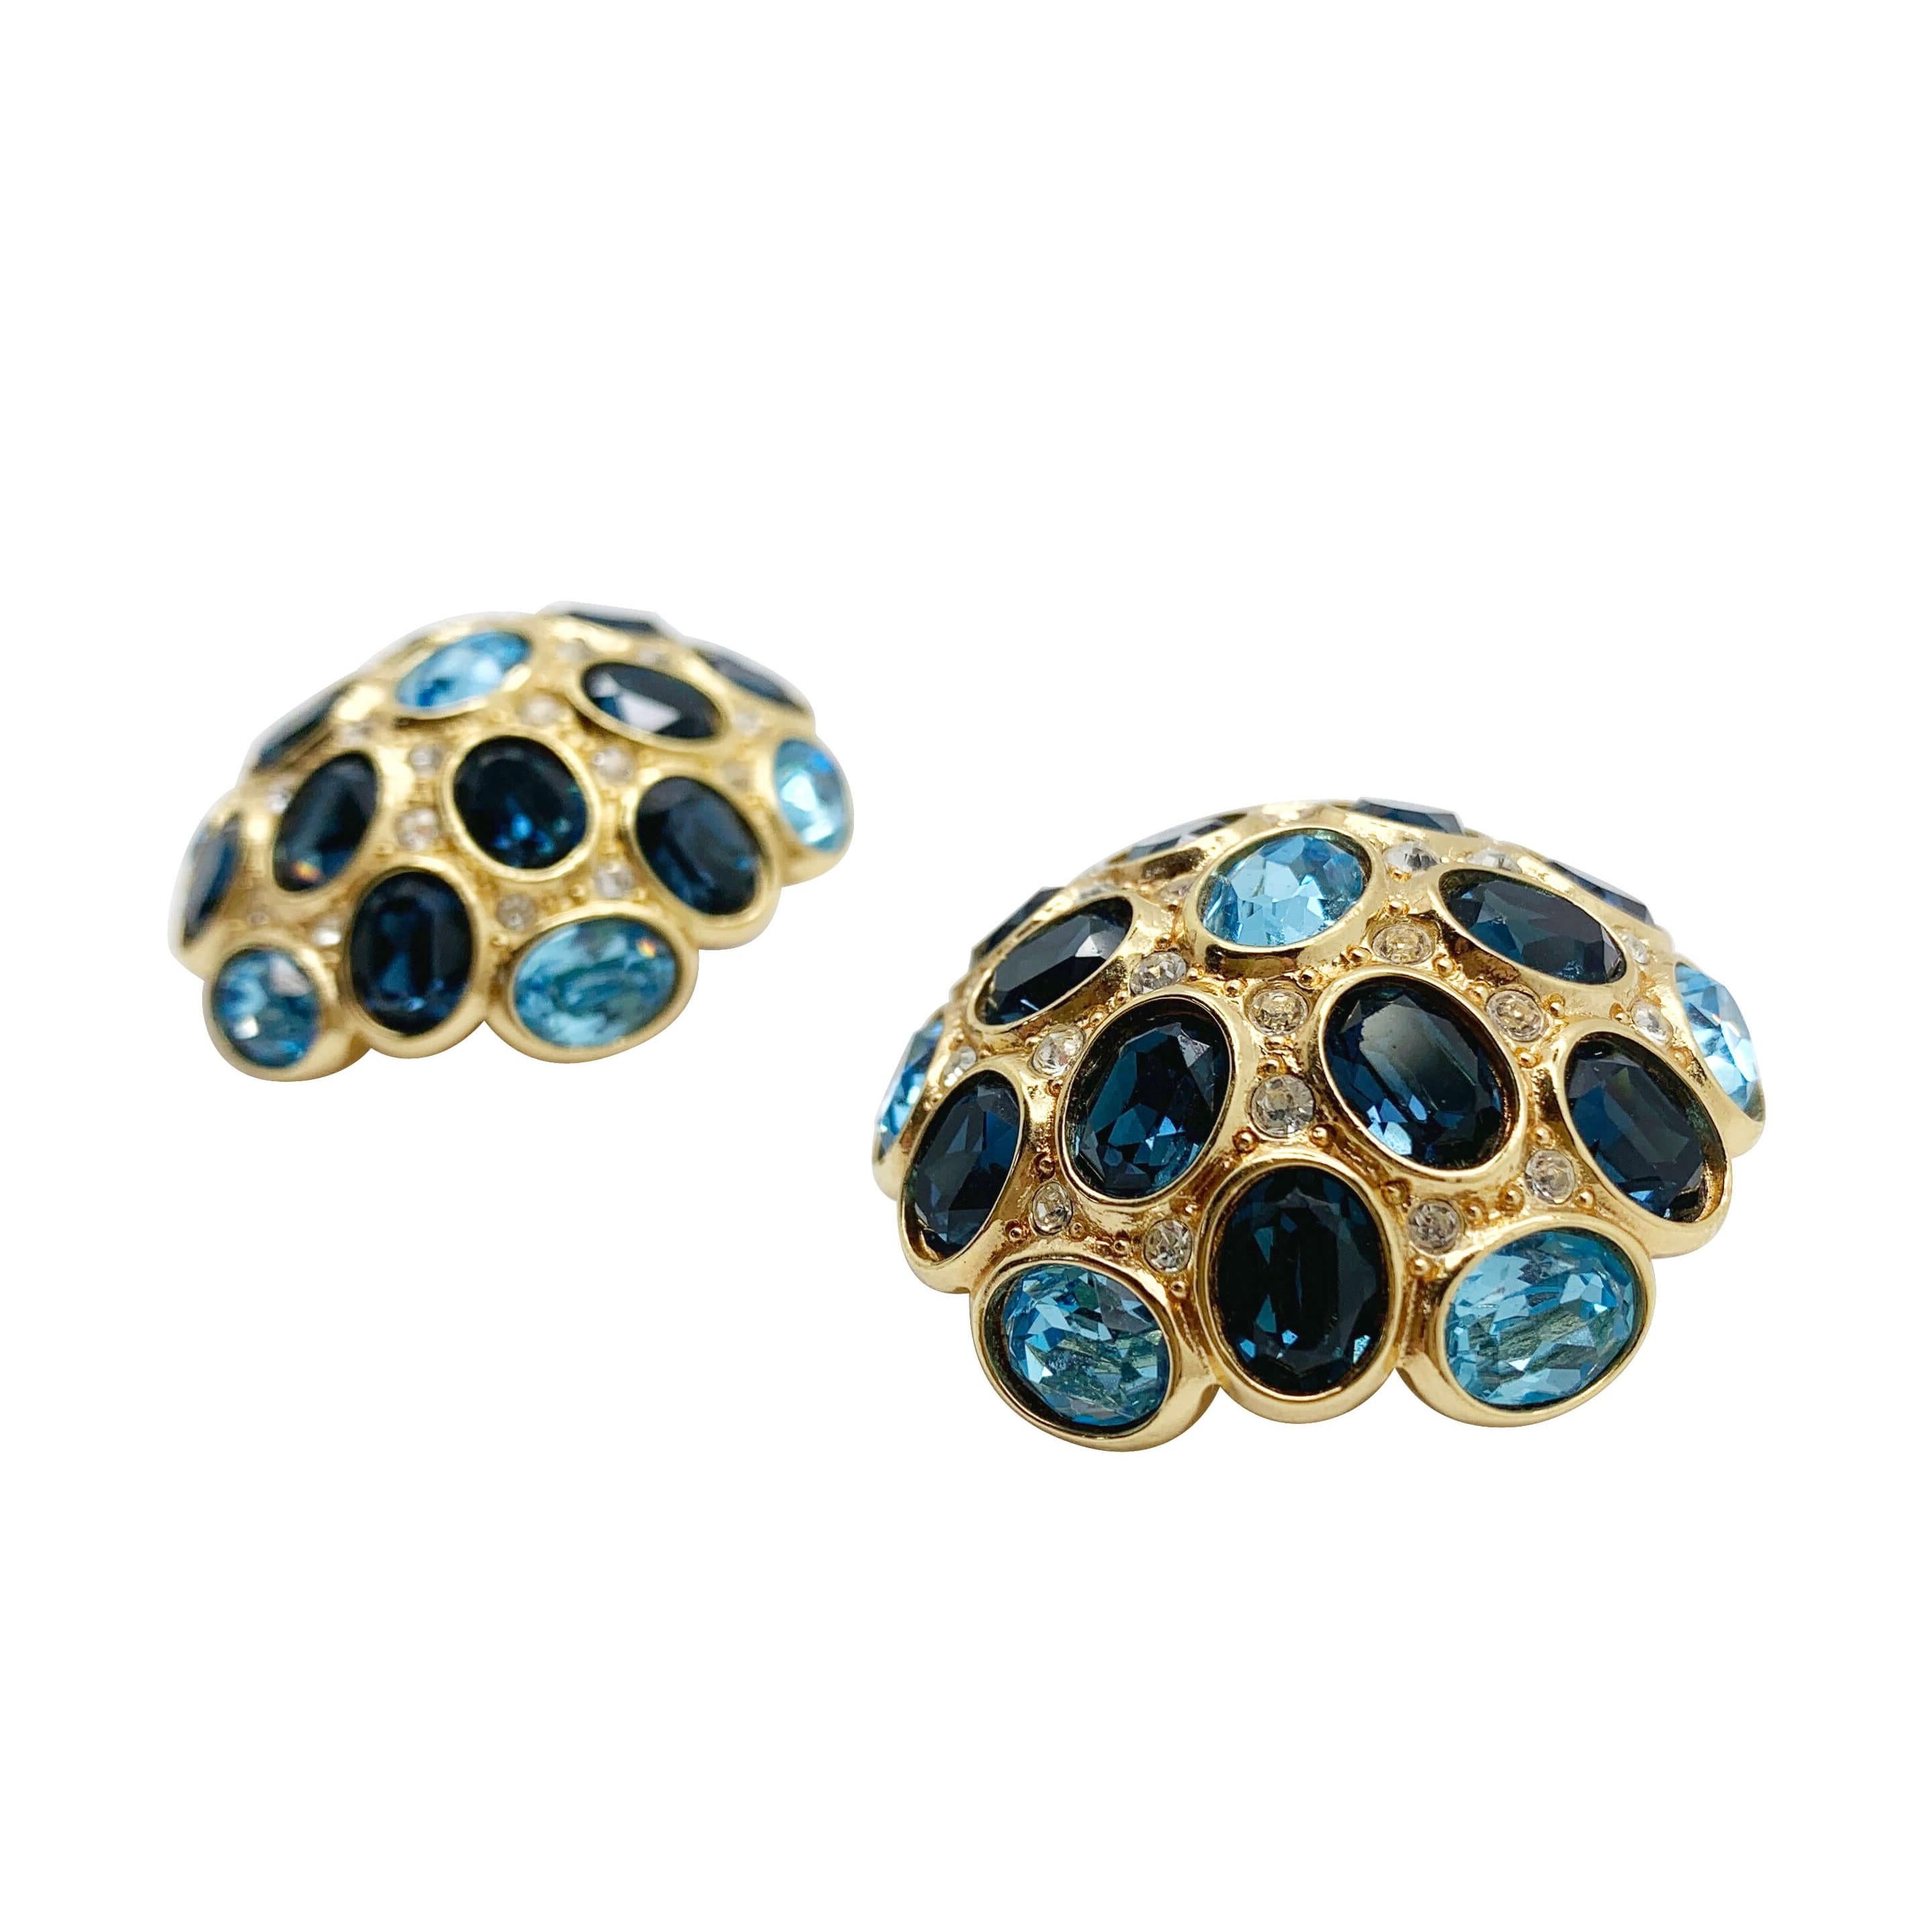 Our Vintage Dior Sapphire Earrings. Oversize domed crystal statement earrings from the House of Dior. The design, bold yet feminine. Wall to wall fancy cut crystals in shades of sapphire and blue topaz prove utterly captivating.  
With archive